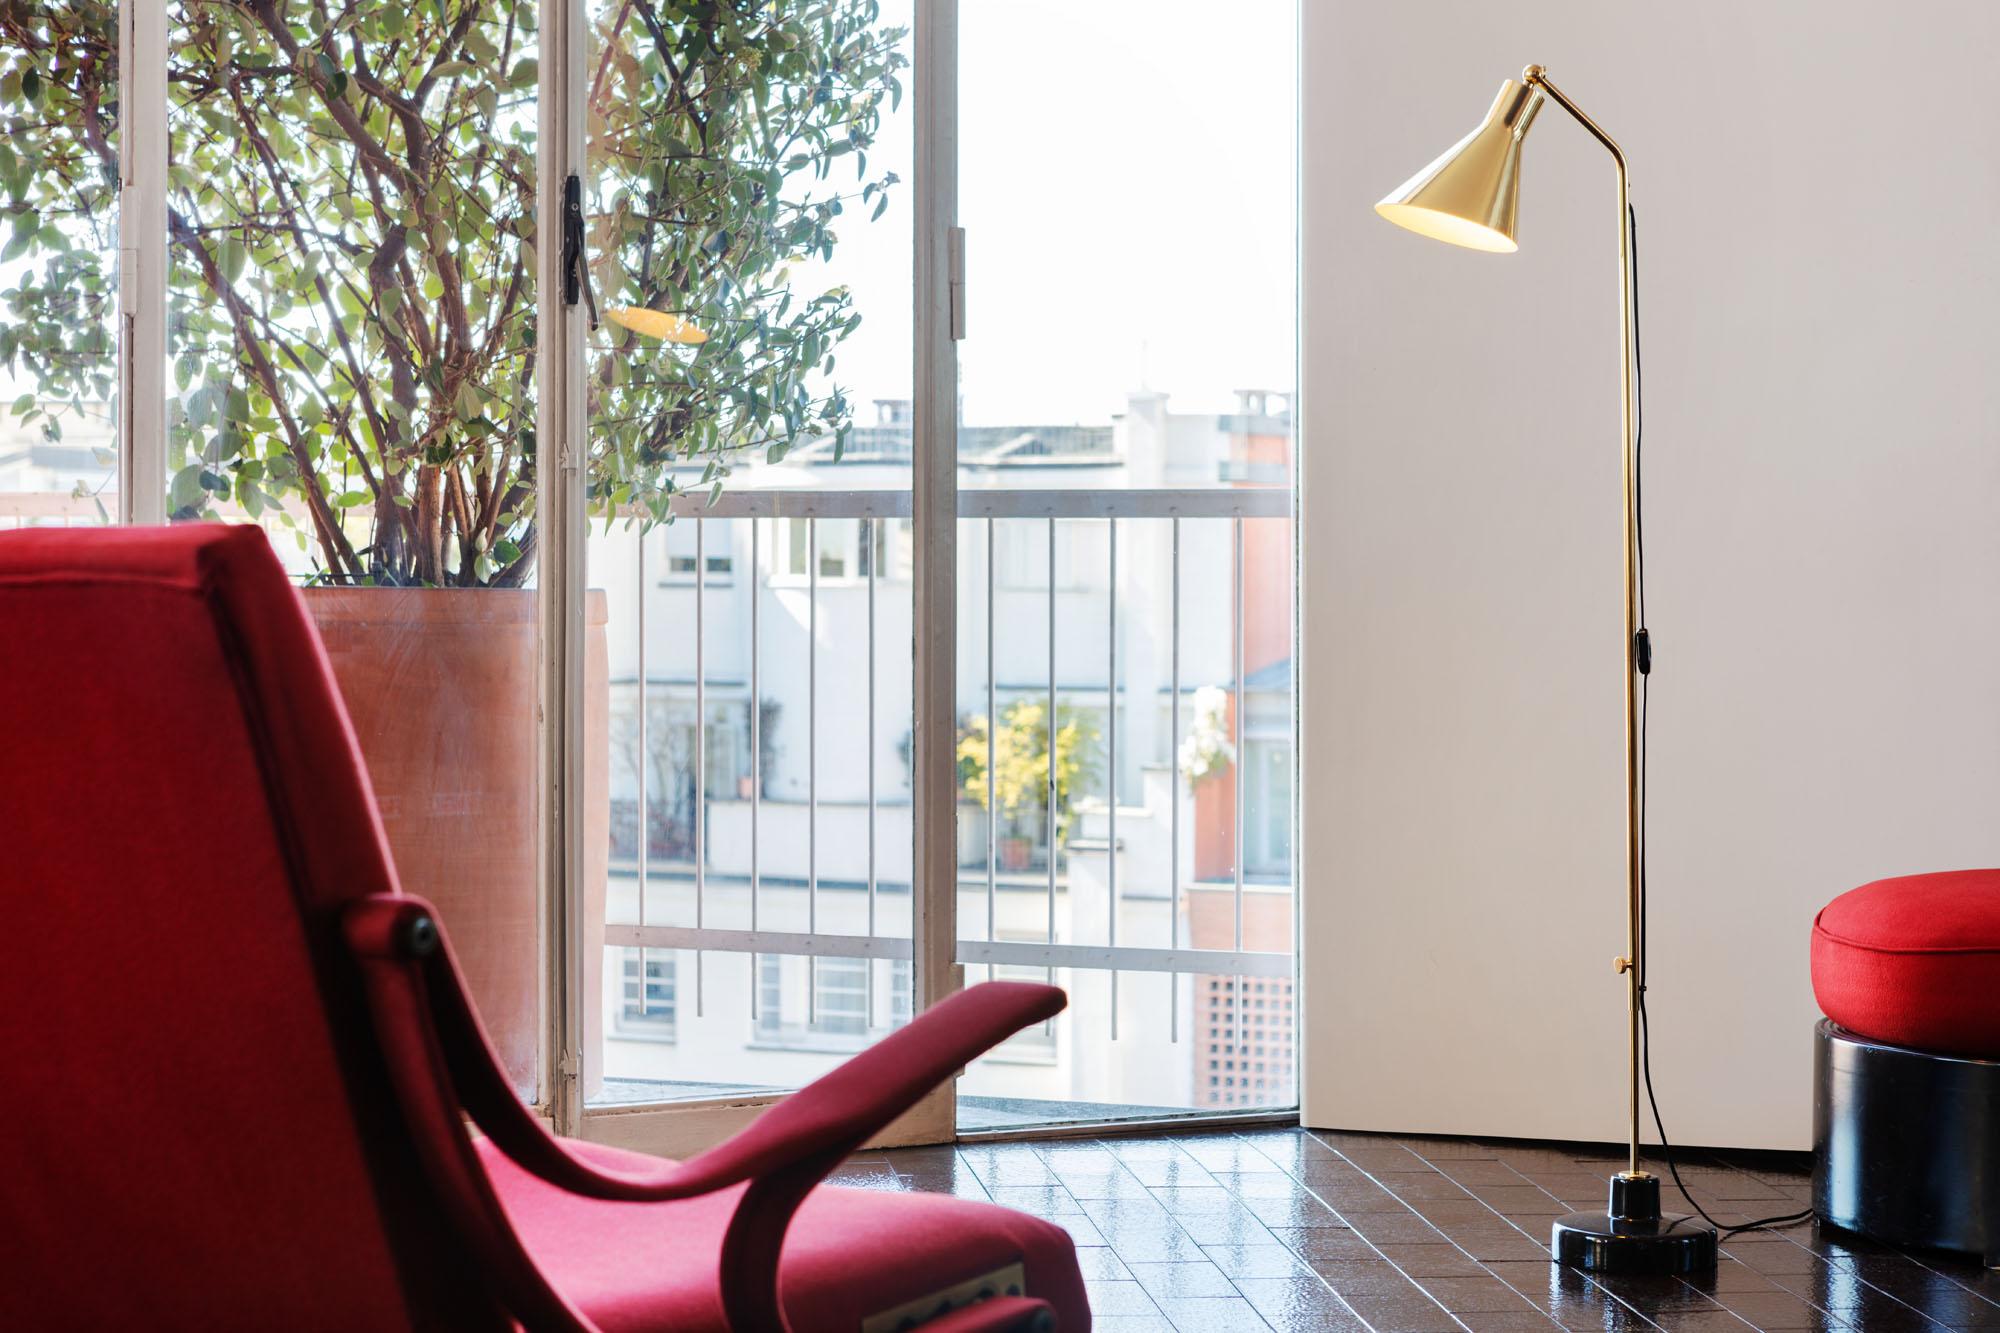 Floor lamp with adjustable height and shade orientation, with brass body and marble base.
Bulb: 1xLED E27/E26 (not included). Black cable with on/off switch.

An Italian design masterpiece born from the pencil of the maestro Ignazio Gardella